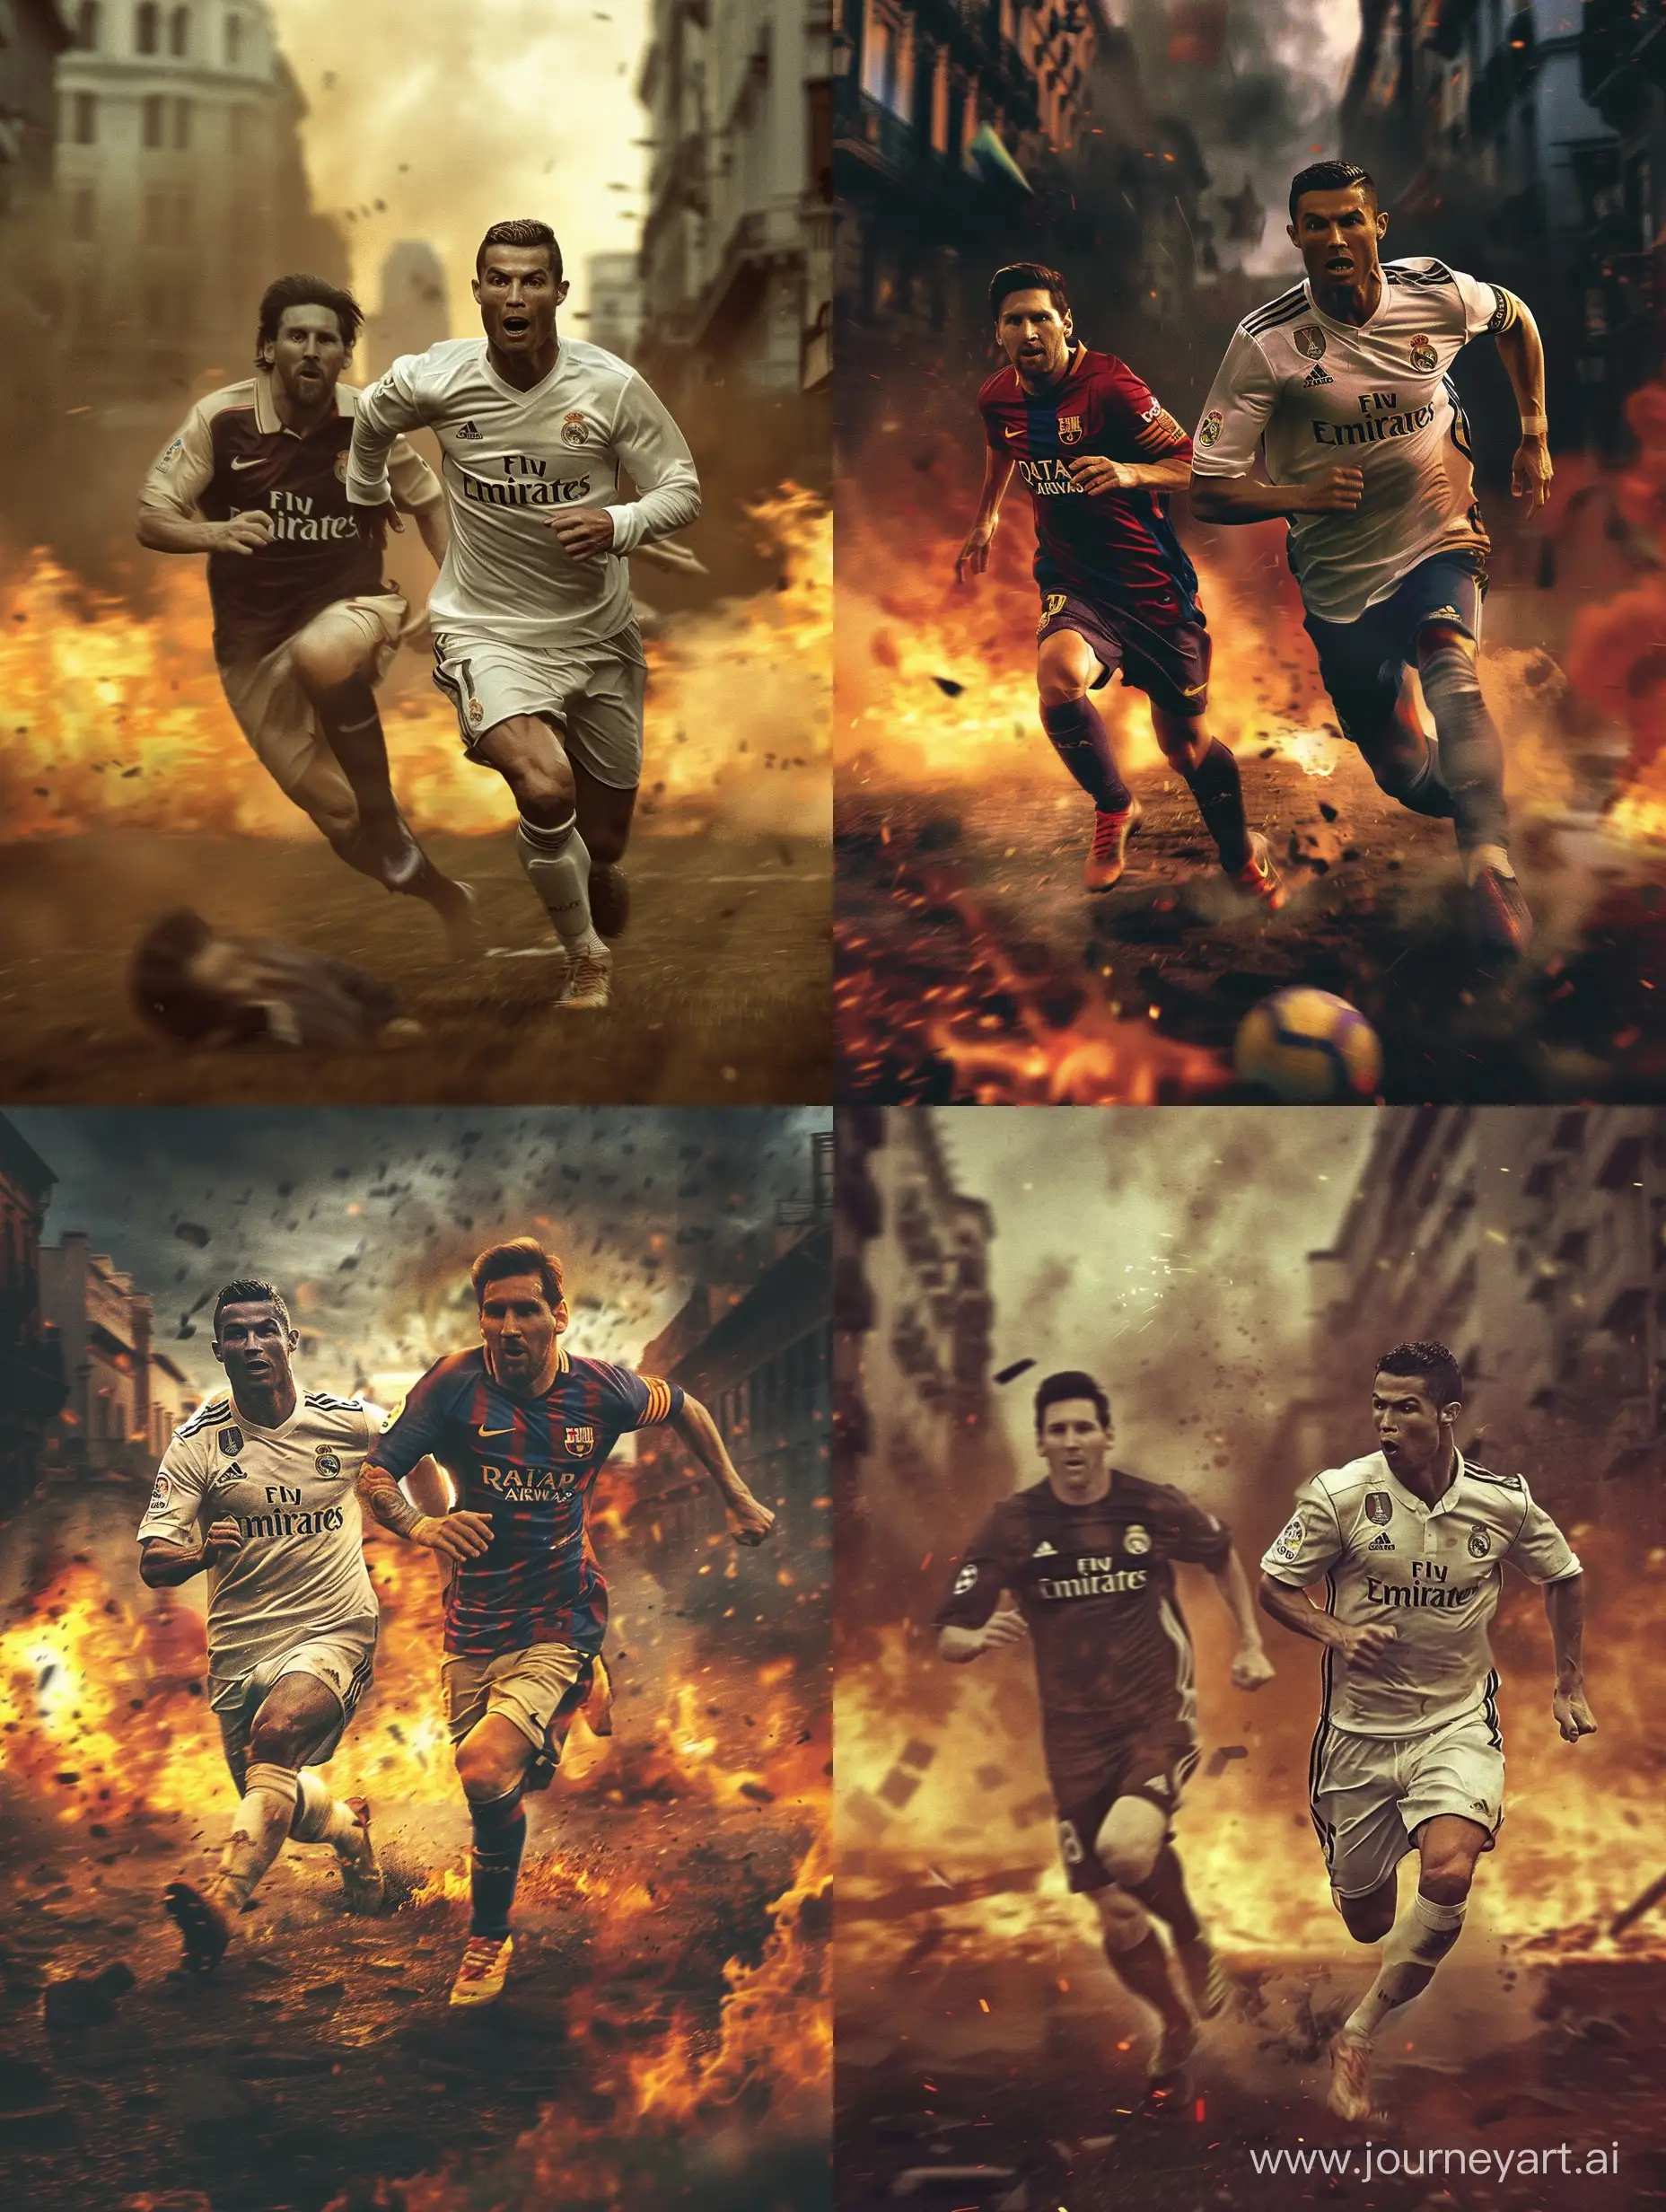 Cristiano ronaldo running from lionel messi that is trying to chase him in a burning city